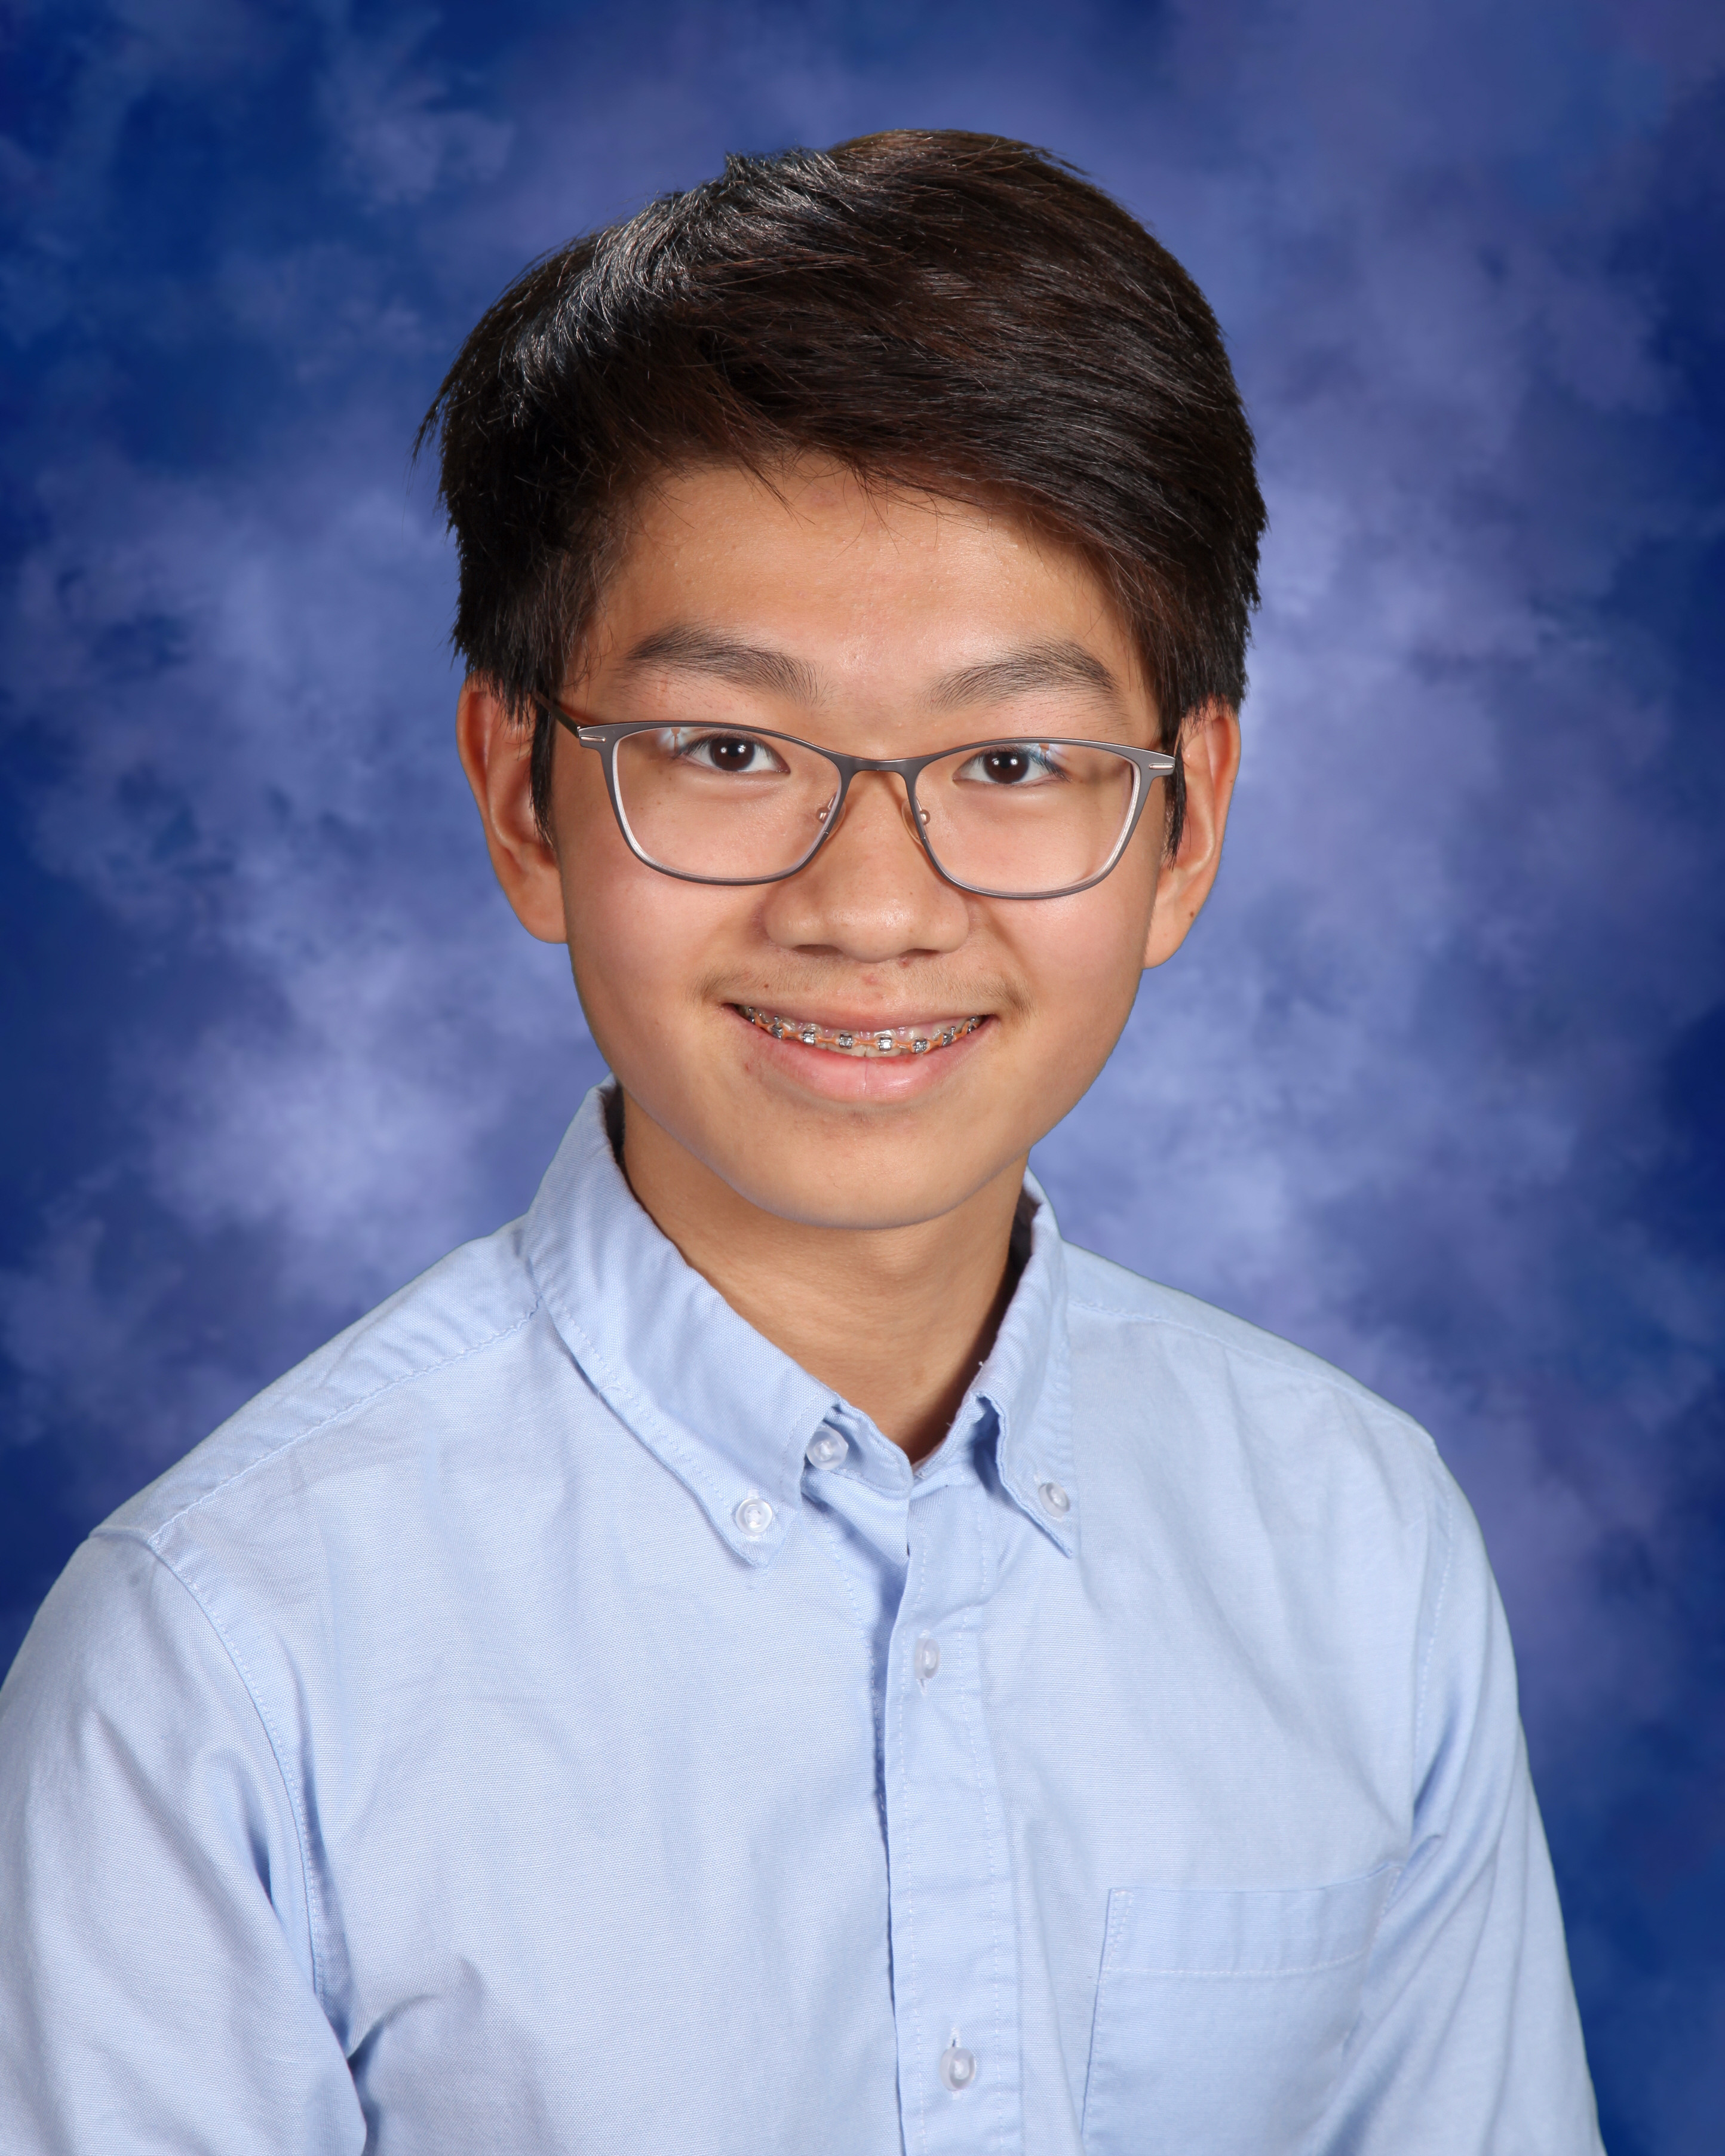 Freshman Earns Honorable Mention in State Science Competition